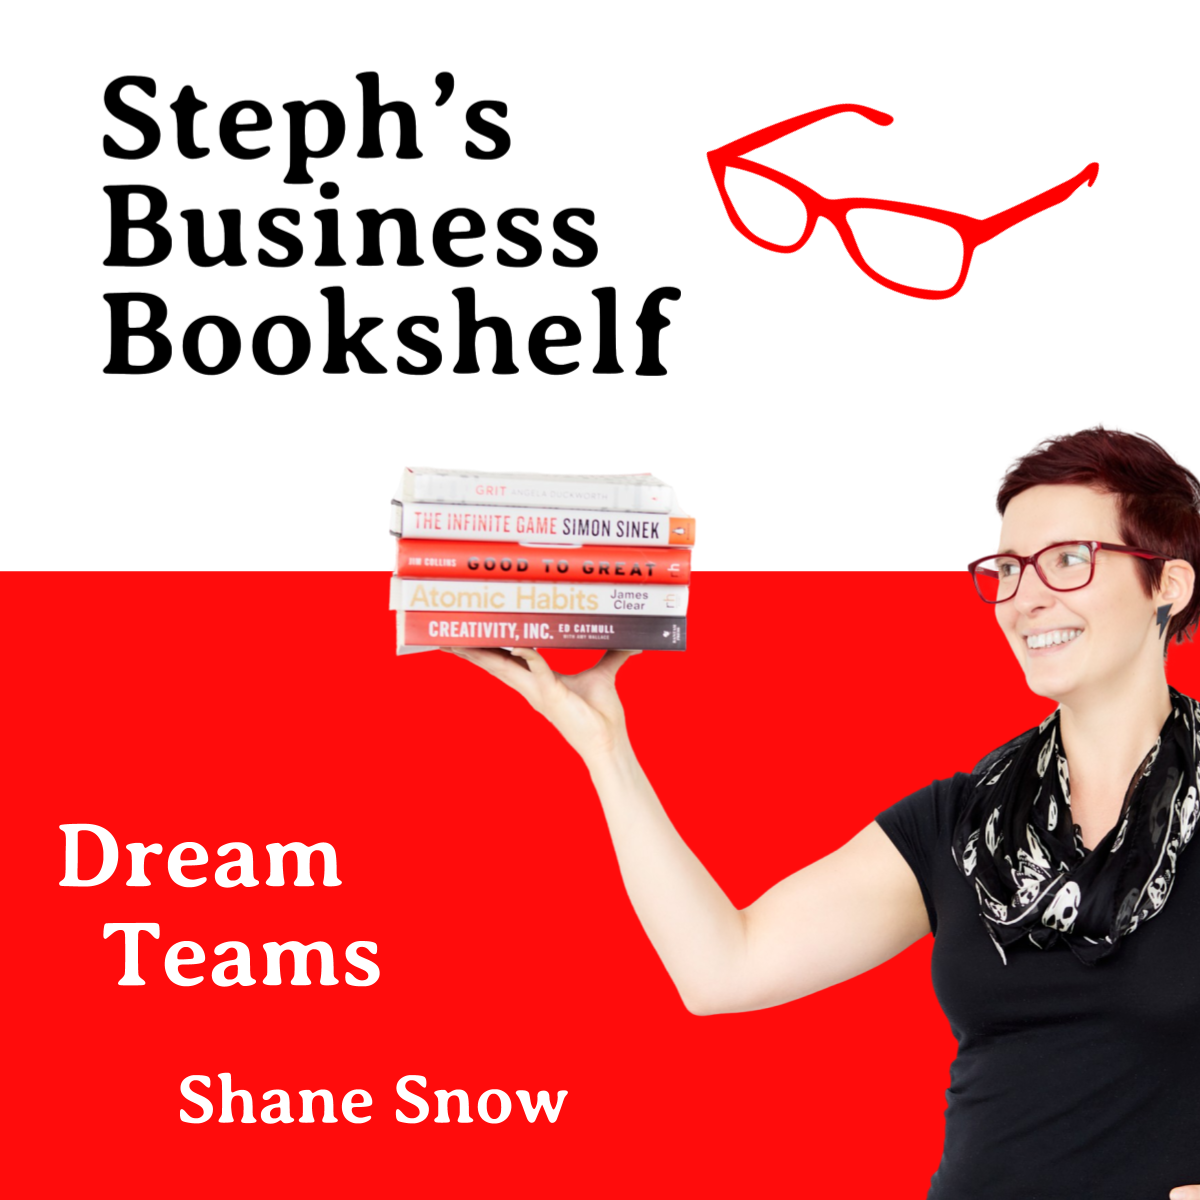 Dream Teams by Shane Snow: How to fight your way to working better together